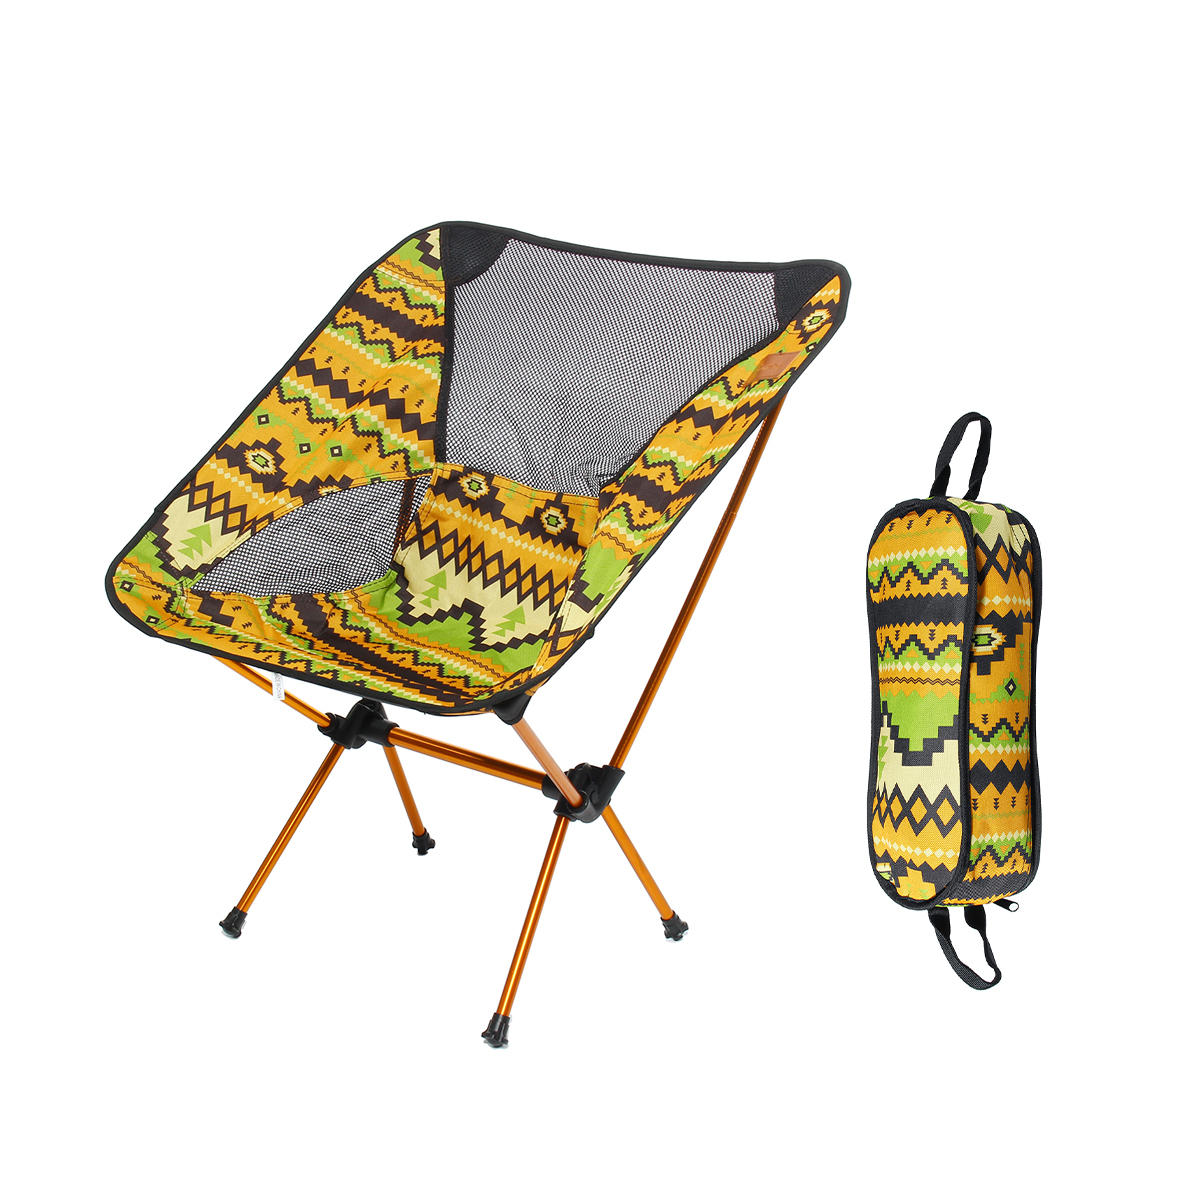 Outdoor Portable Folding Chair Aluminum Alloy BBQ Seat Stool Camping Picnic Max Load 150kg